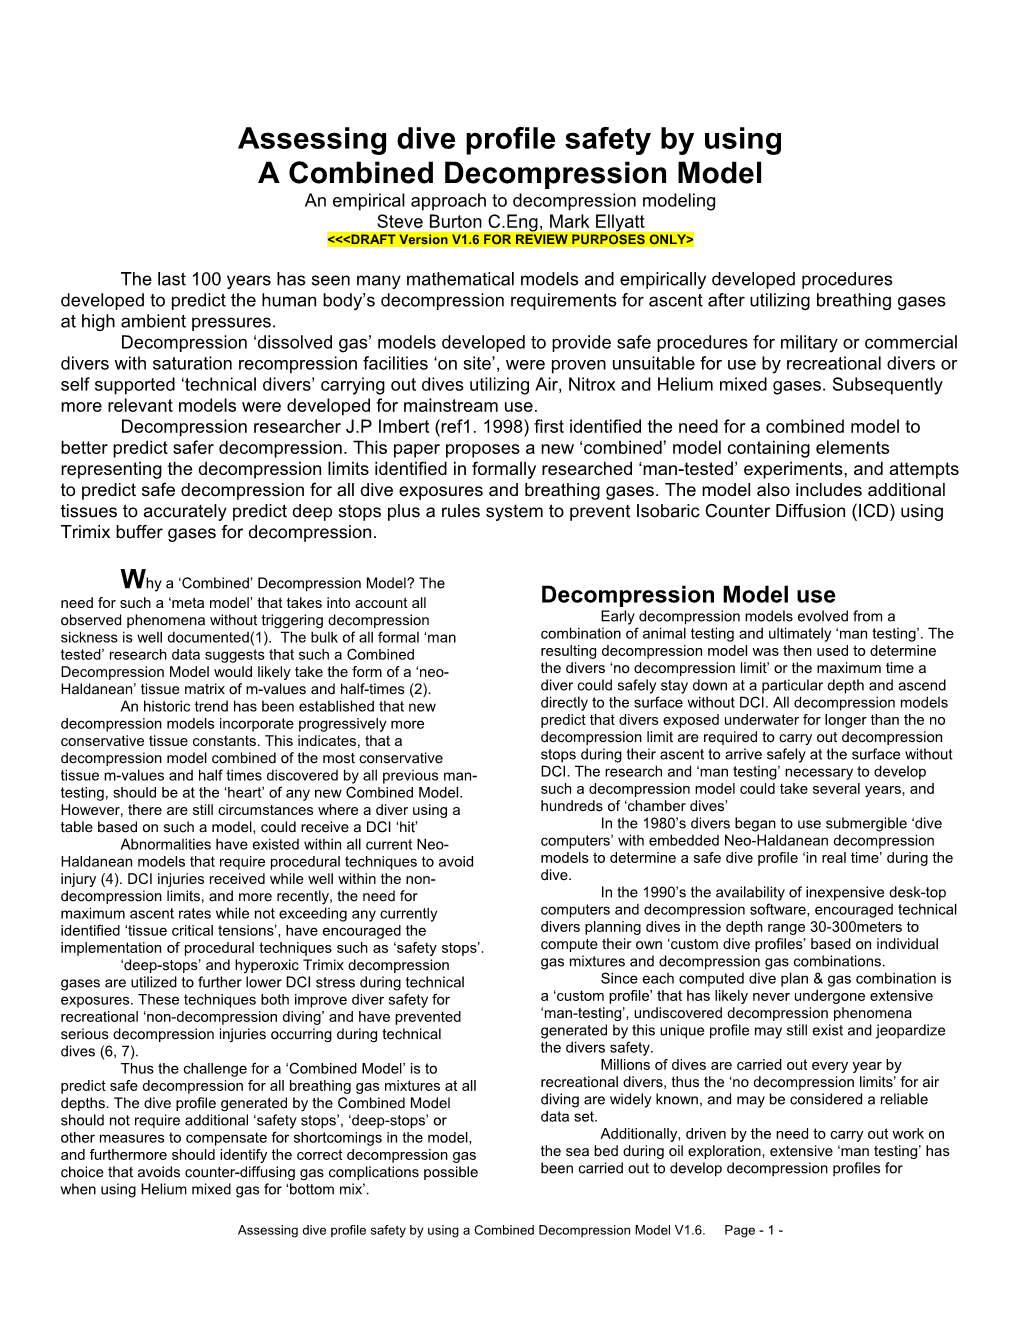 The Unified Decompression Model